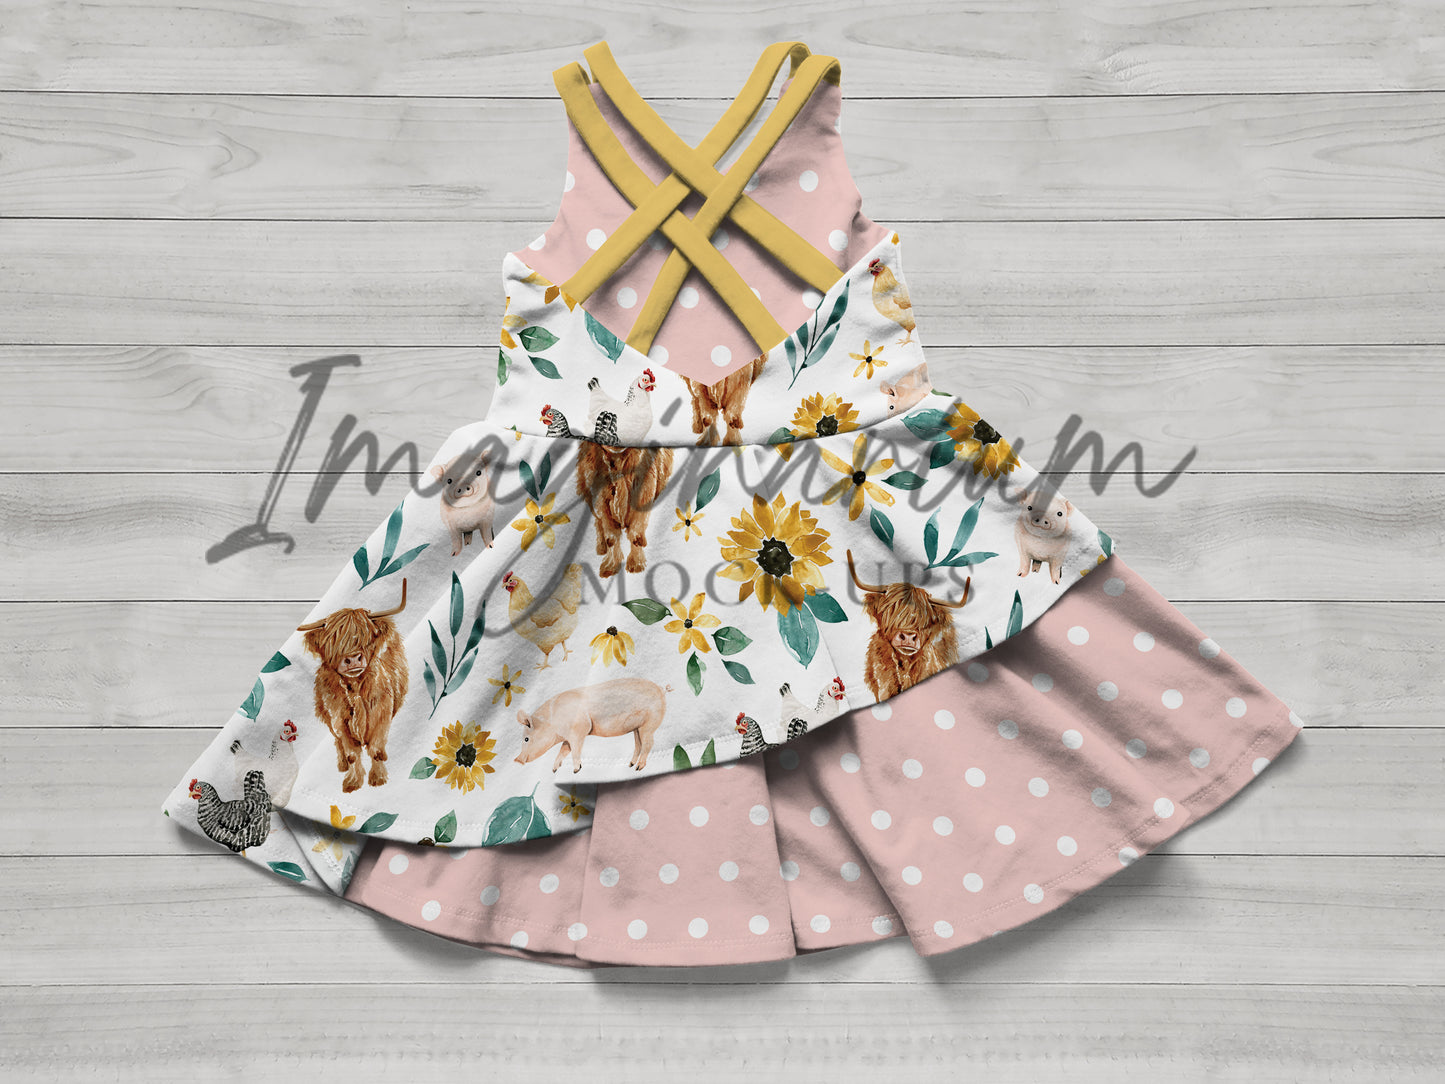 Tigerlily Multi Strap Tiered Skirt Dress Mock Up, Realistic Clothing Mockup for Photoshop and Procreate